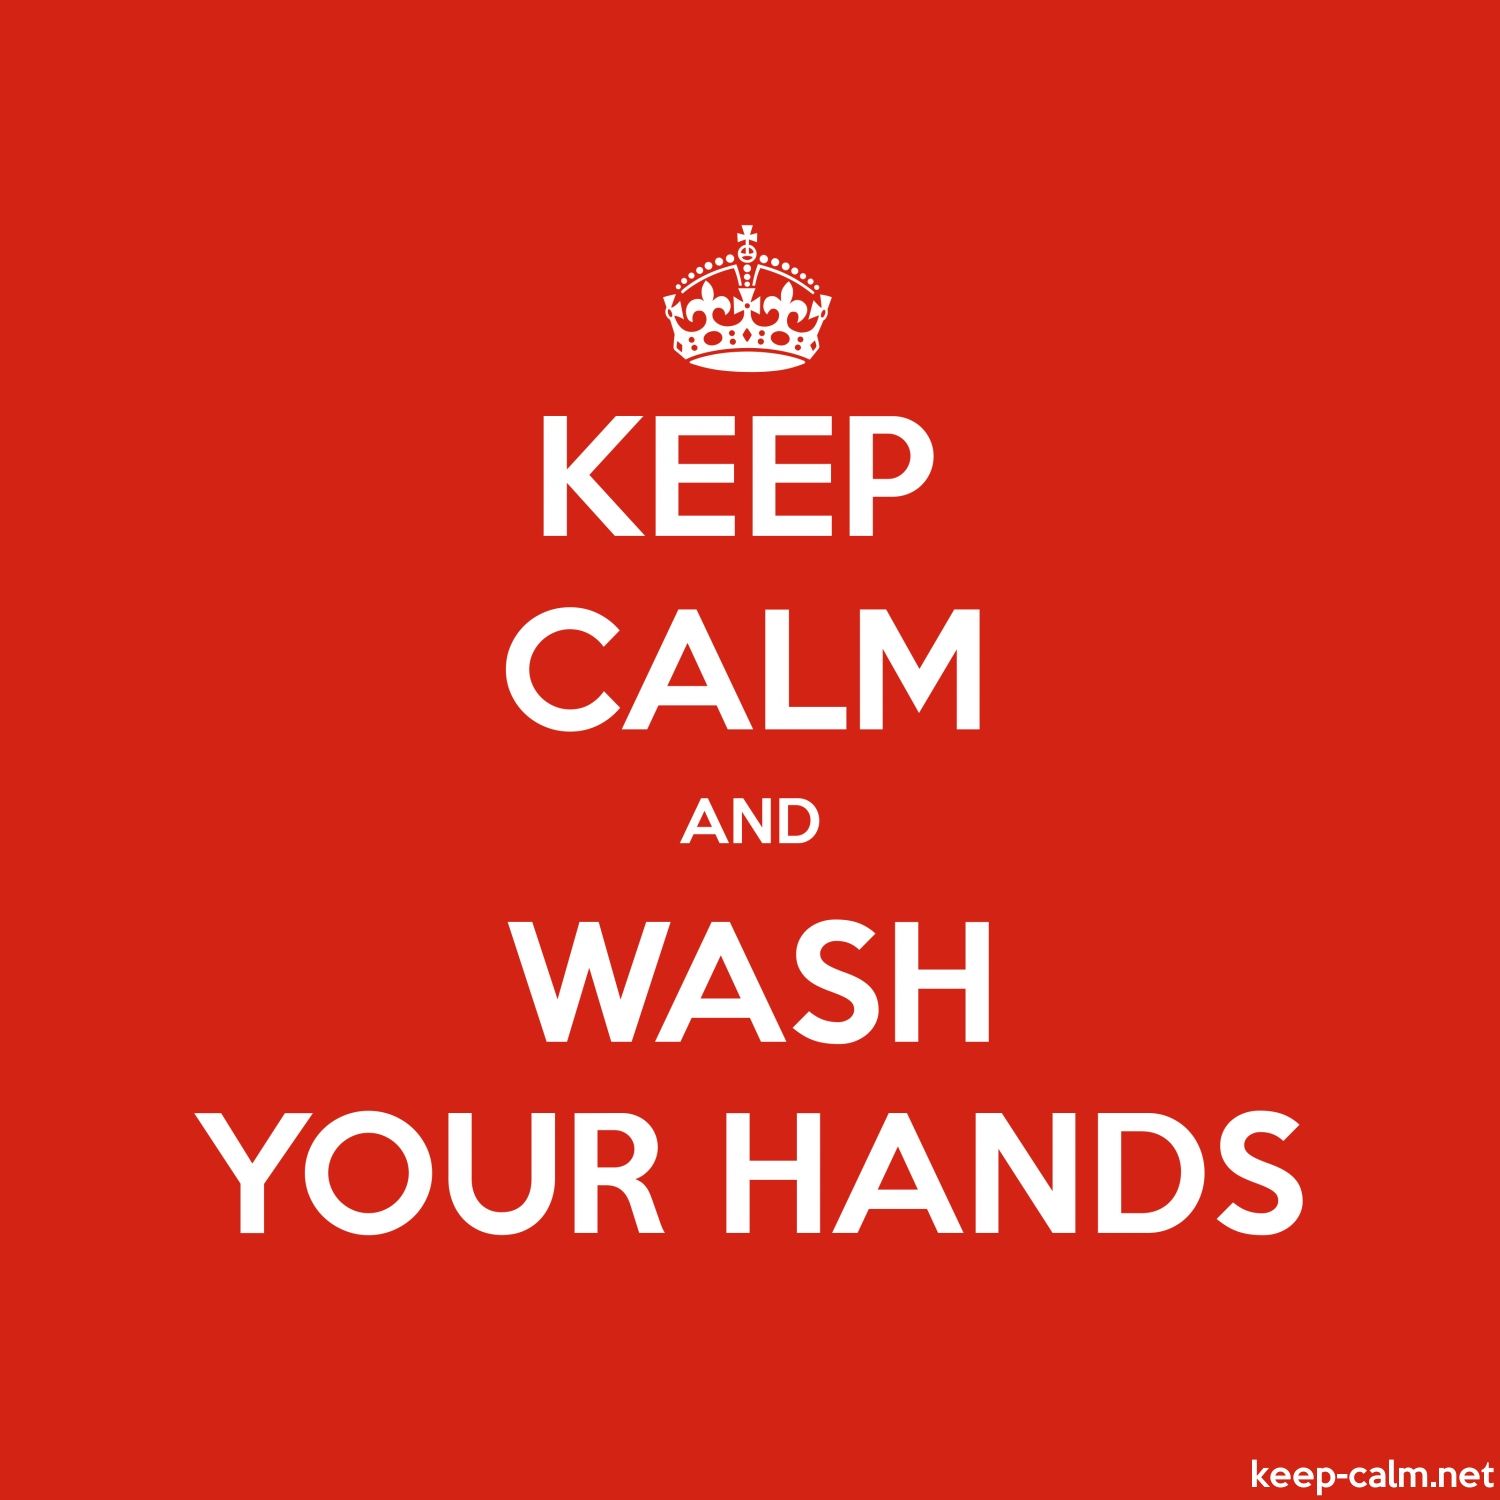 KEEP CALM AND WASH YOUR HANDS